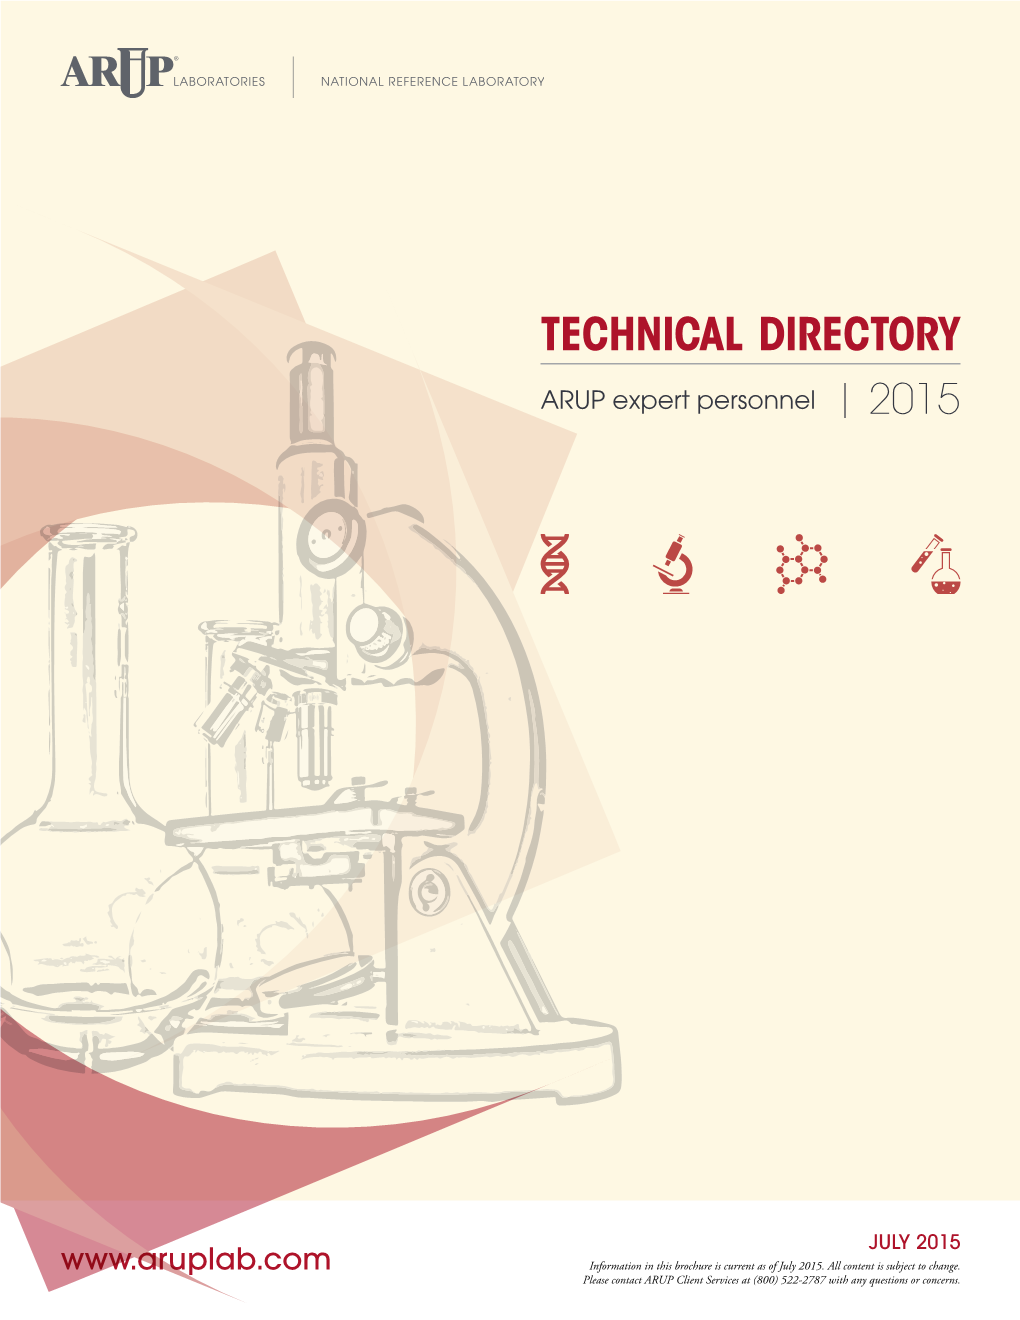 TECHNICAL DIRECTORY ARUP Expert Personnel | 2015